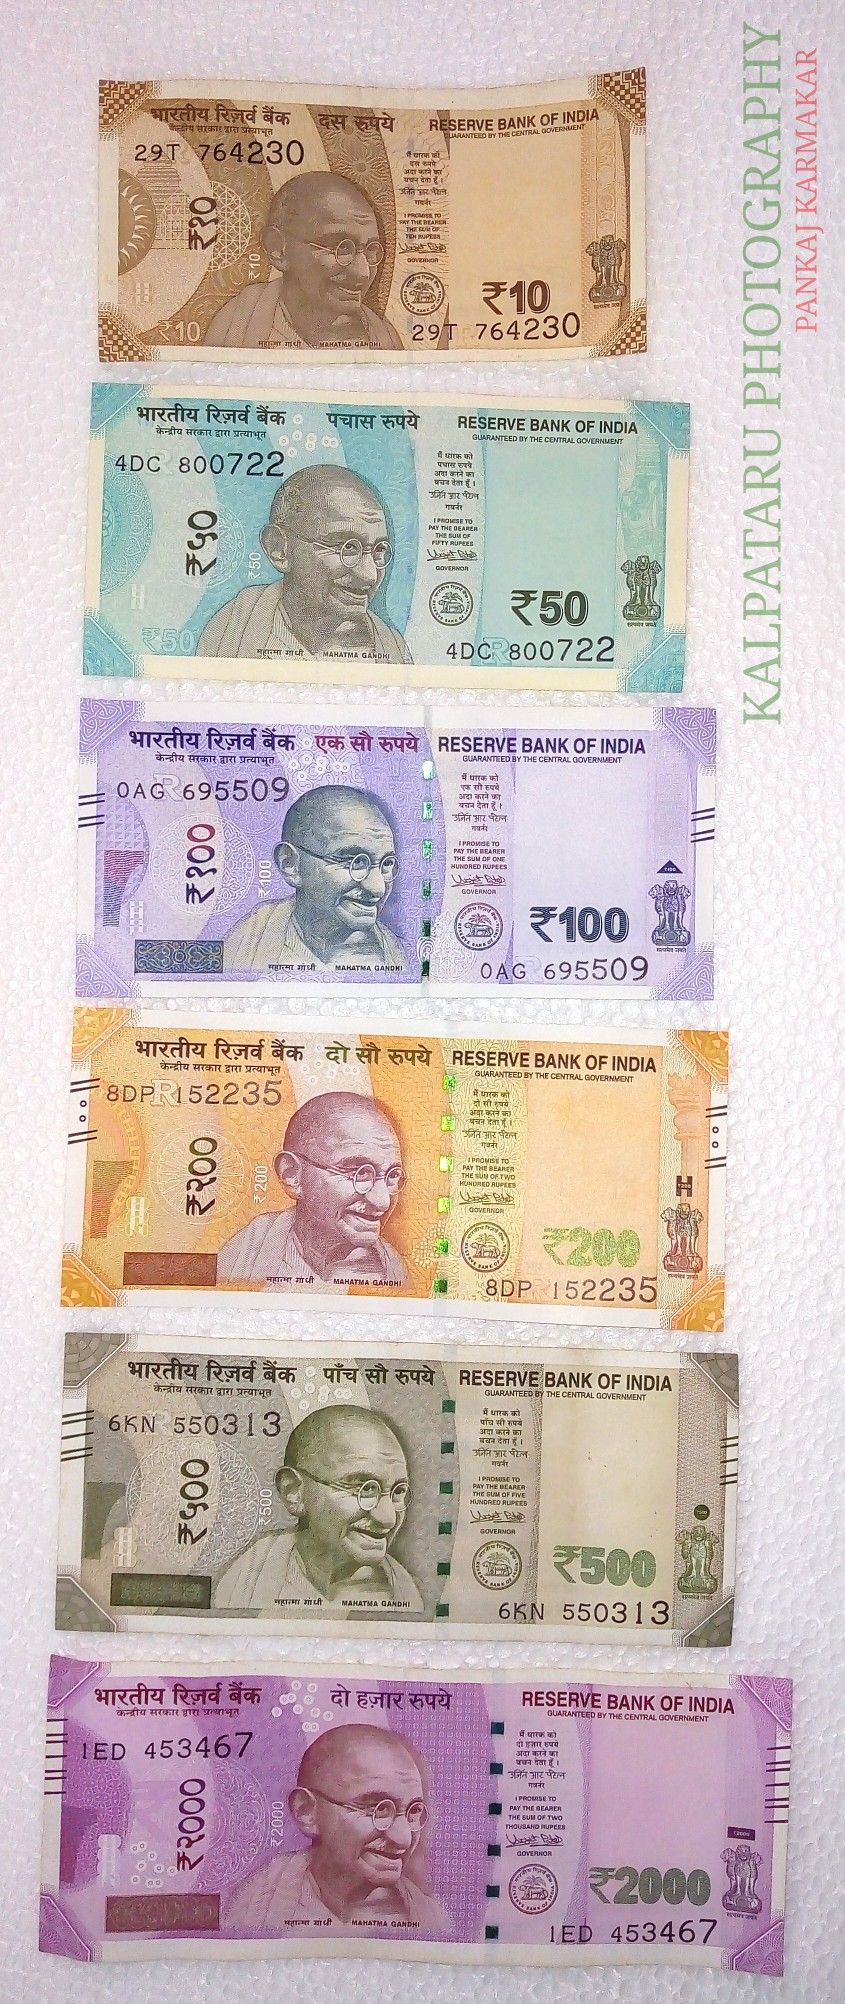 New Currency Of India - HD Wallpaper 